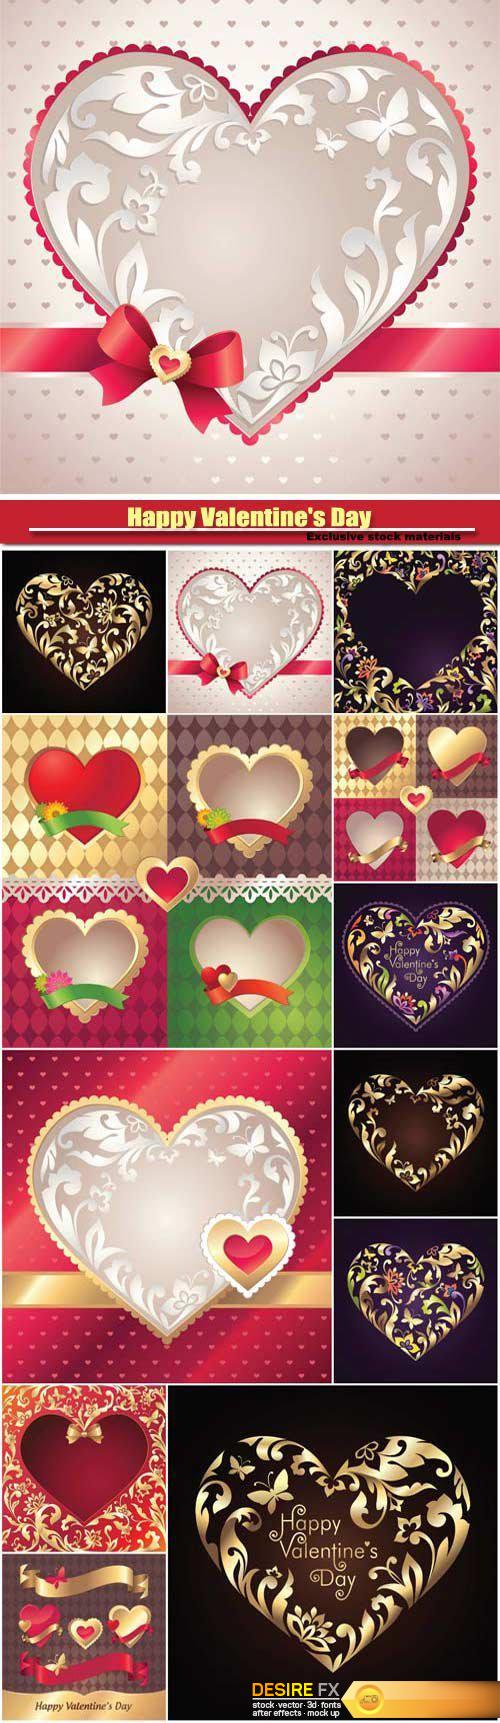 Happy Valentine's Day, vector background with hearts and ornaments